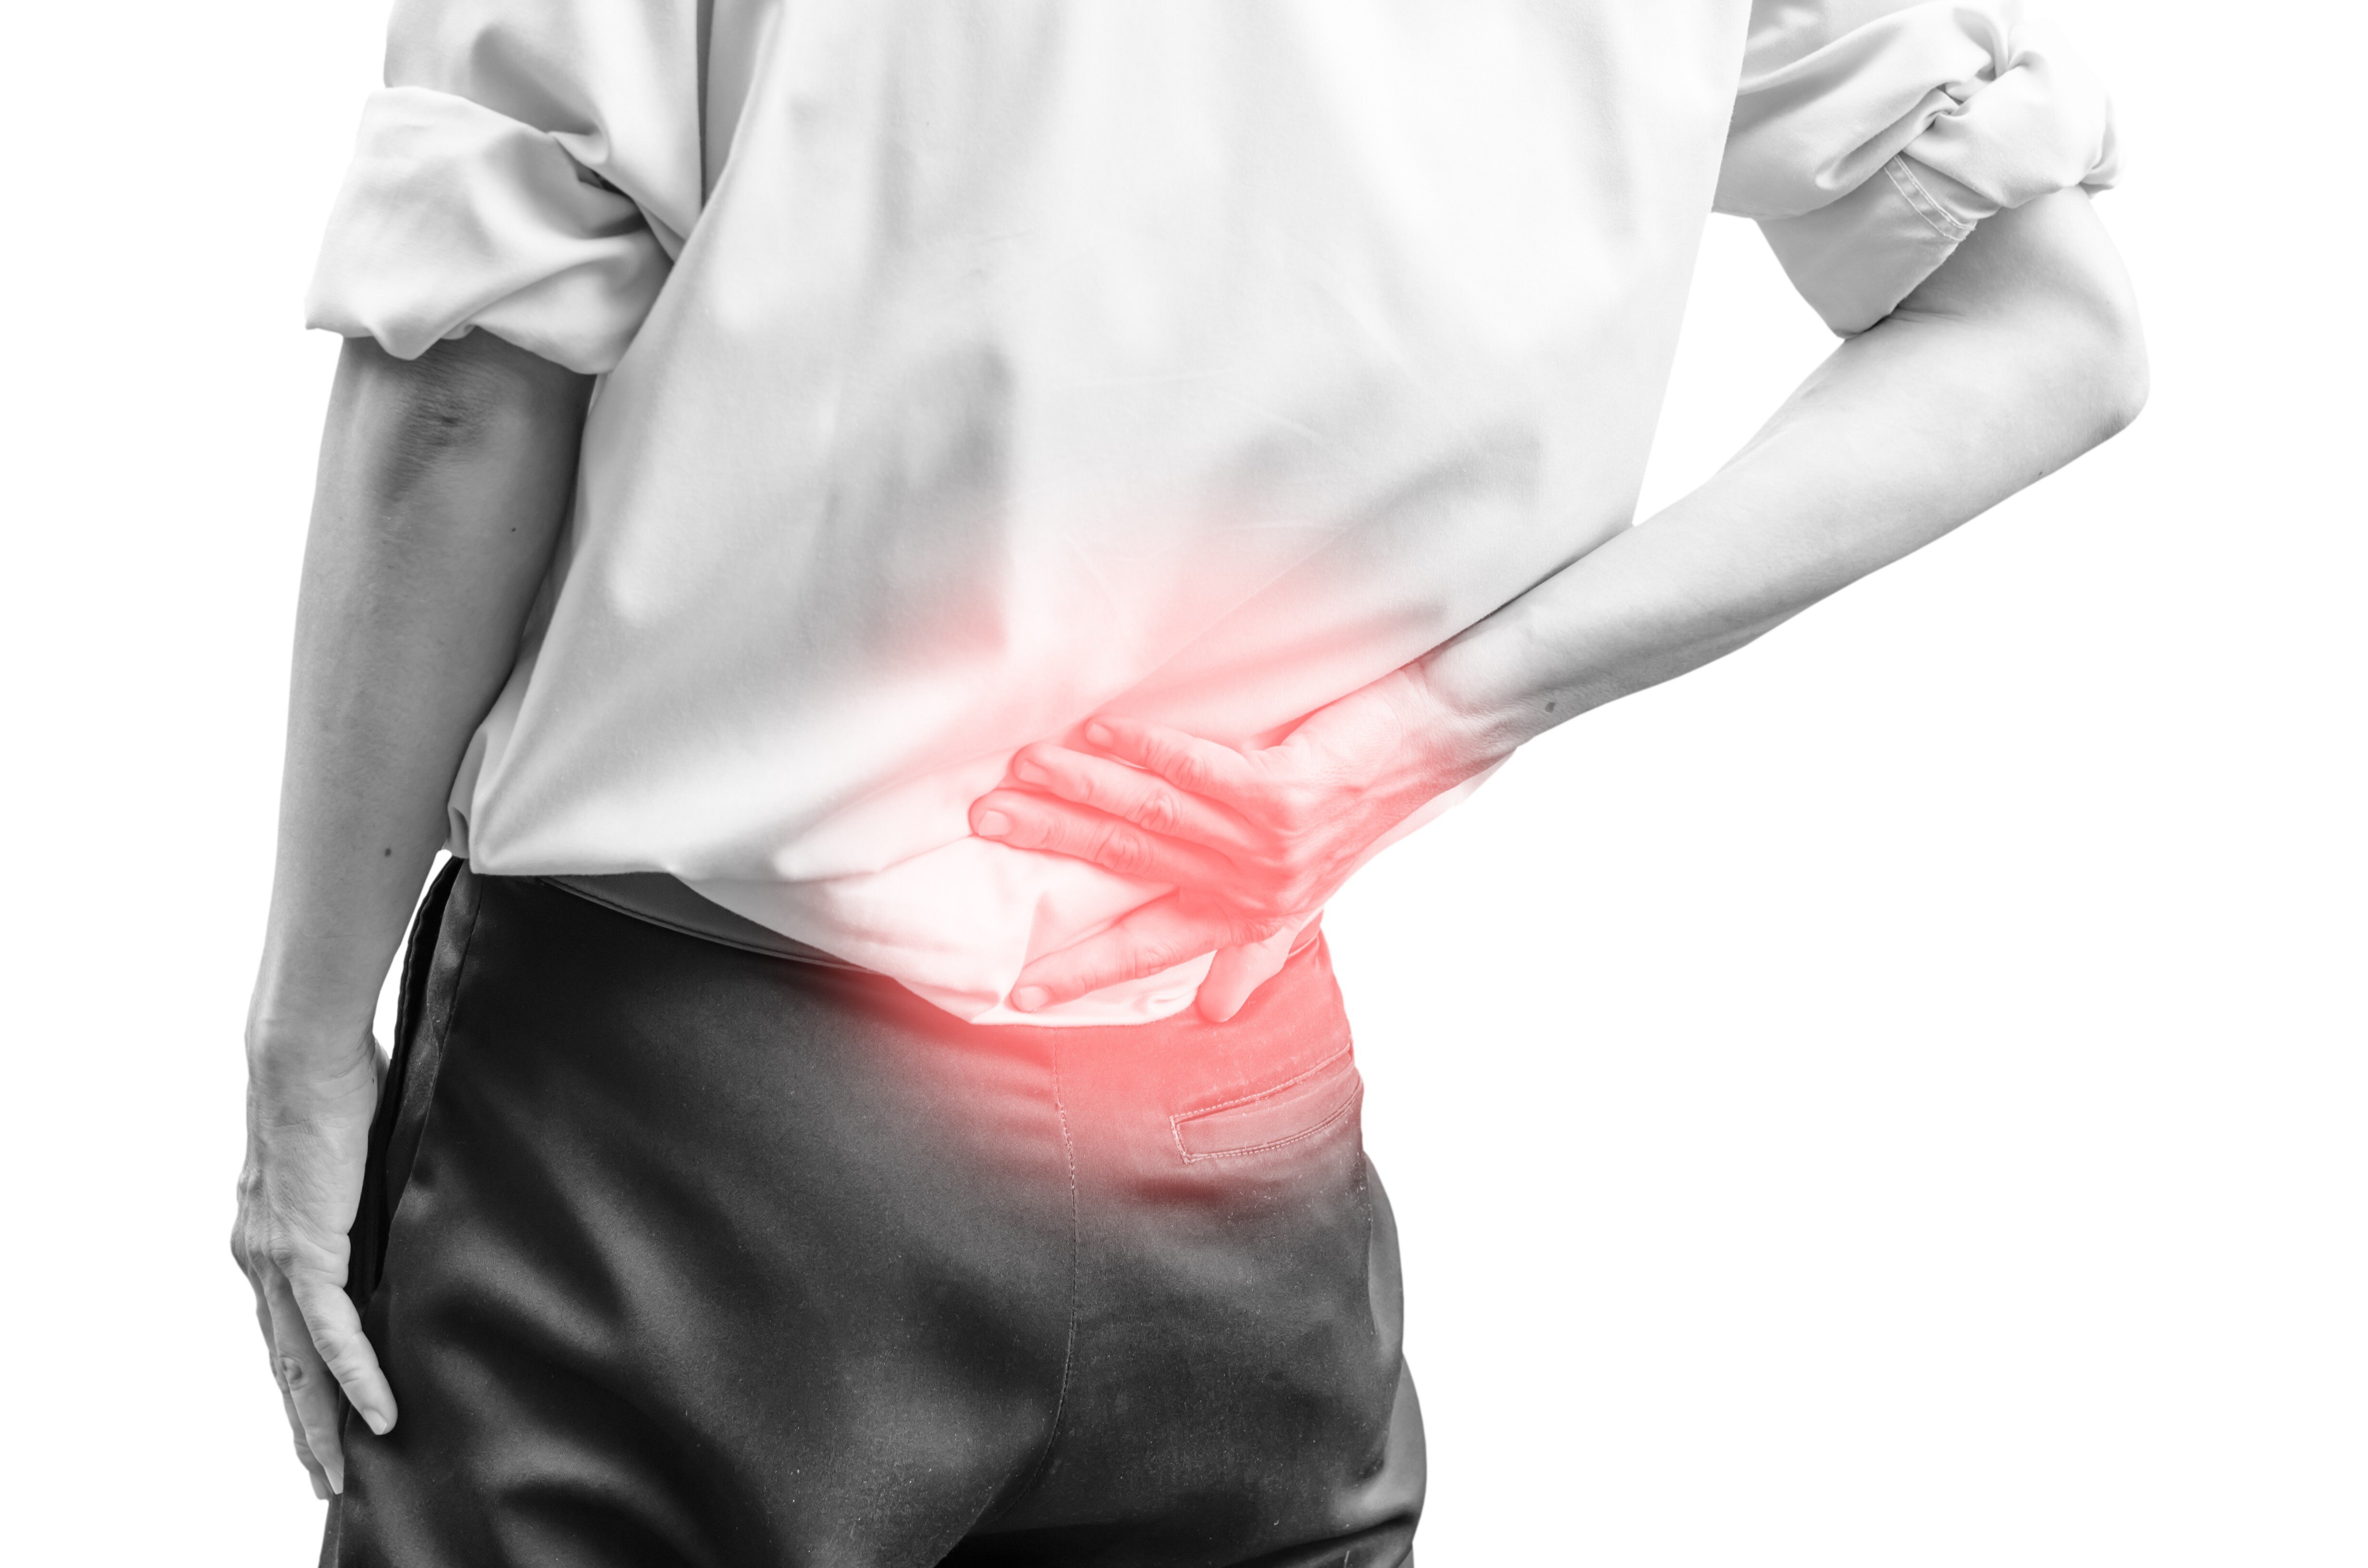 Back pain is common for runners but strengthening muscles like hamstrings can help fix the issue. Photo: Shutterstock